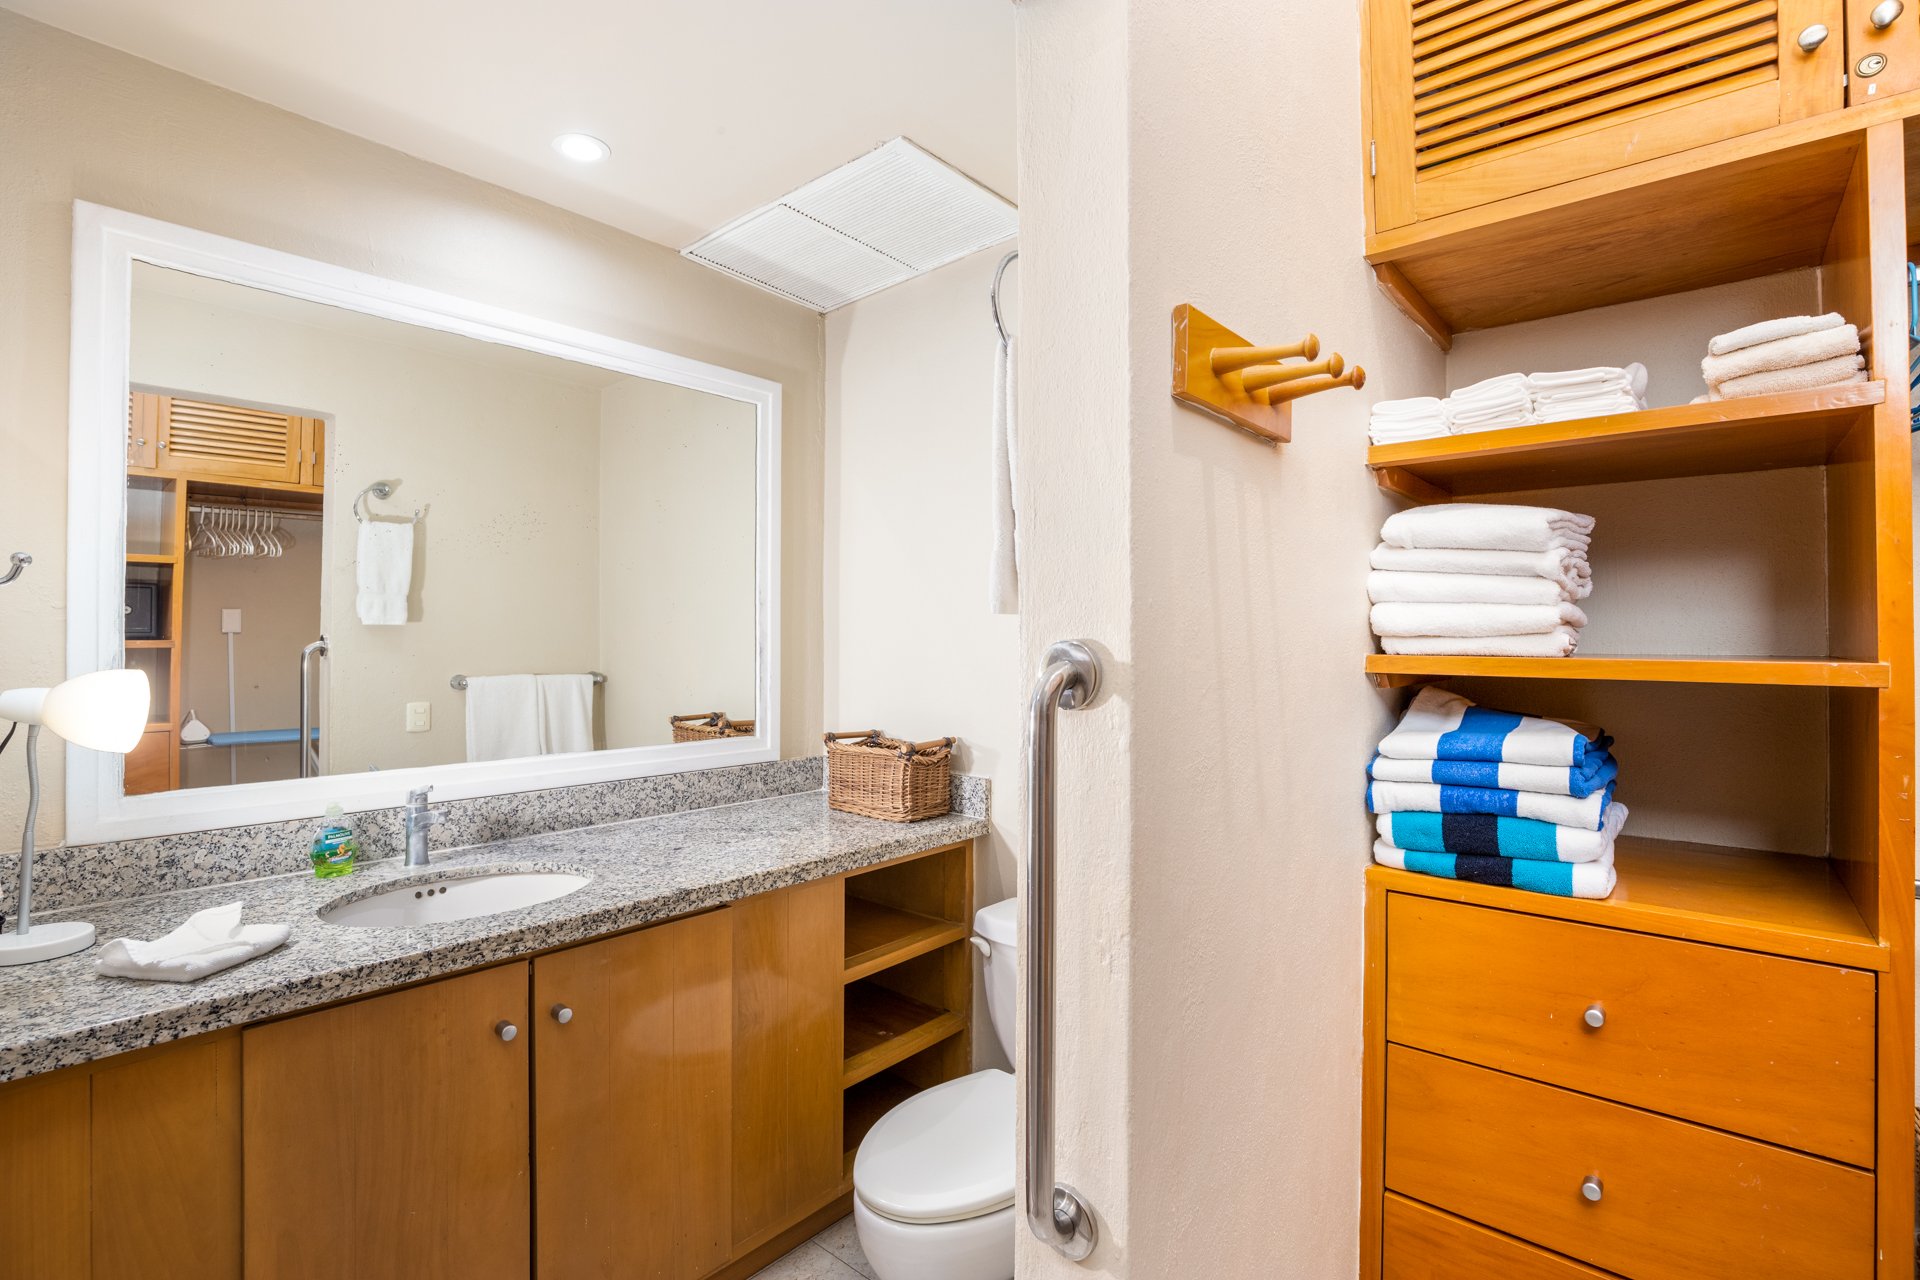 Full Bathroom from the Master bedroom. With a grab bar next to the toilet Towels included.